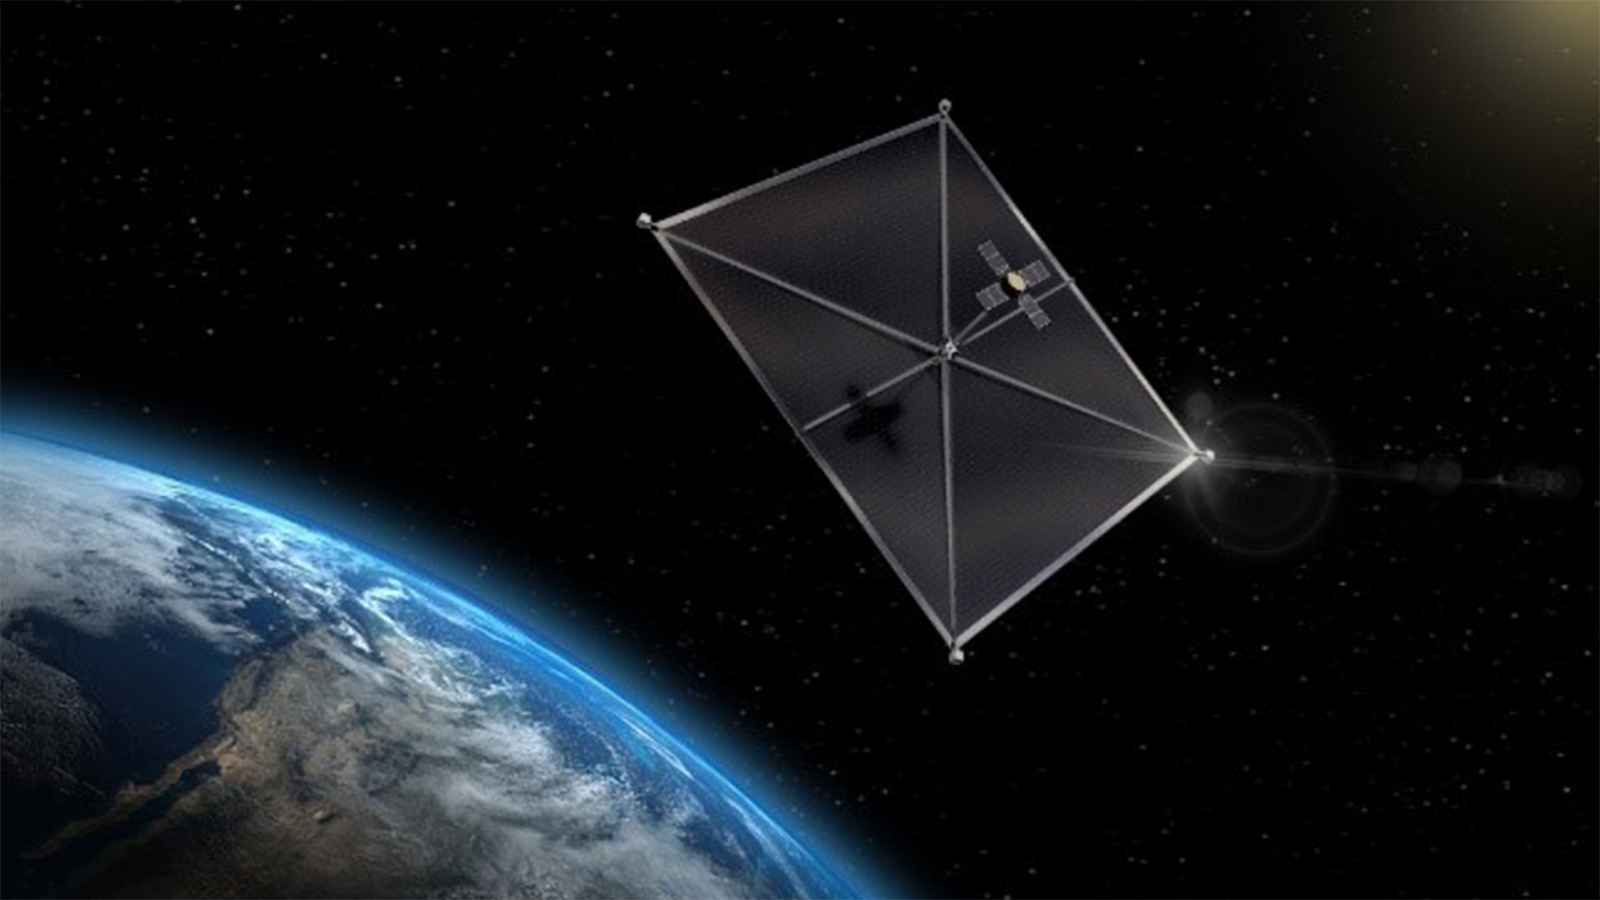 Next step for AFRL’s space-based solar power quest: energy beaming